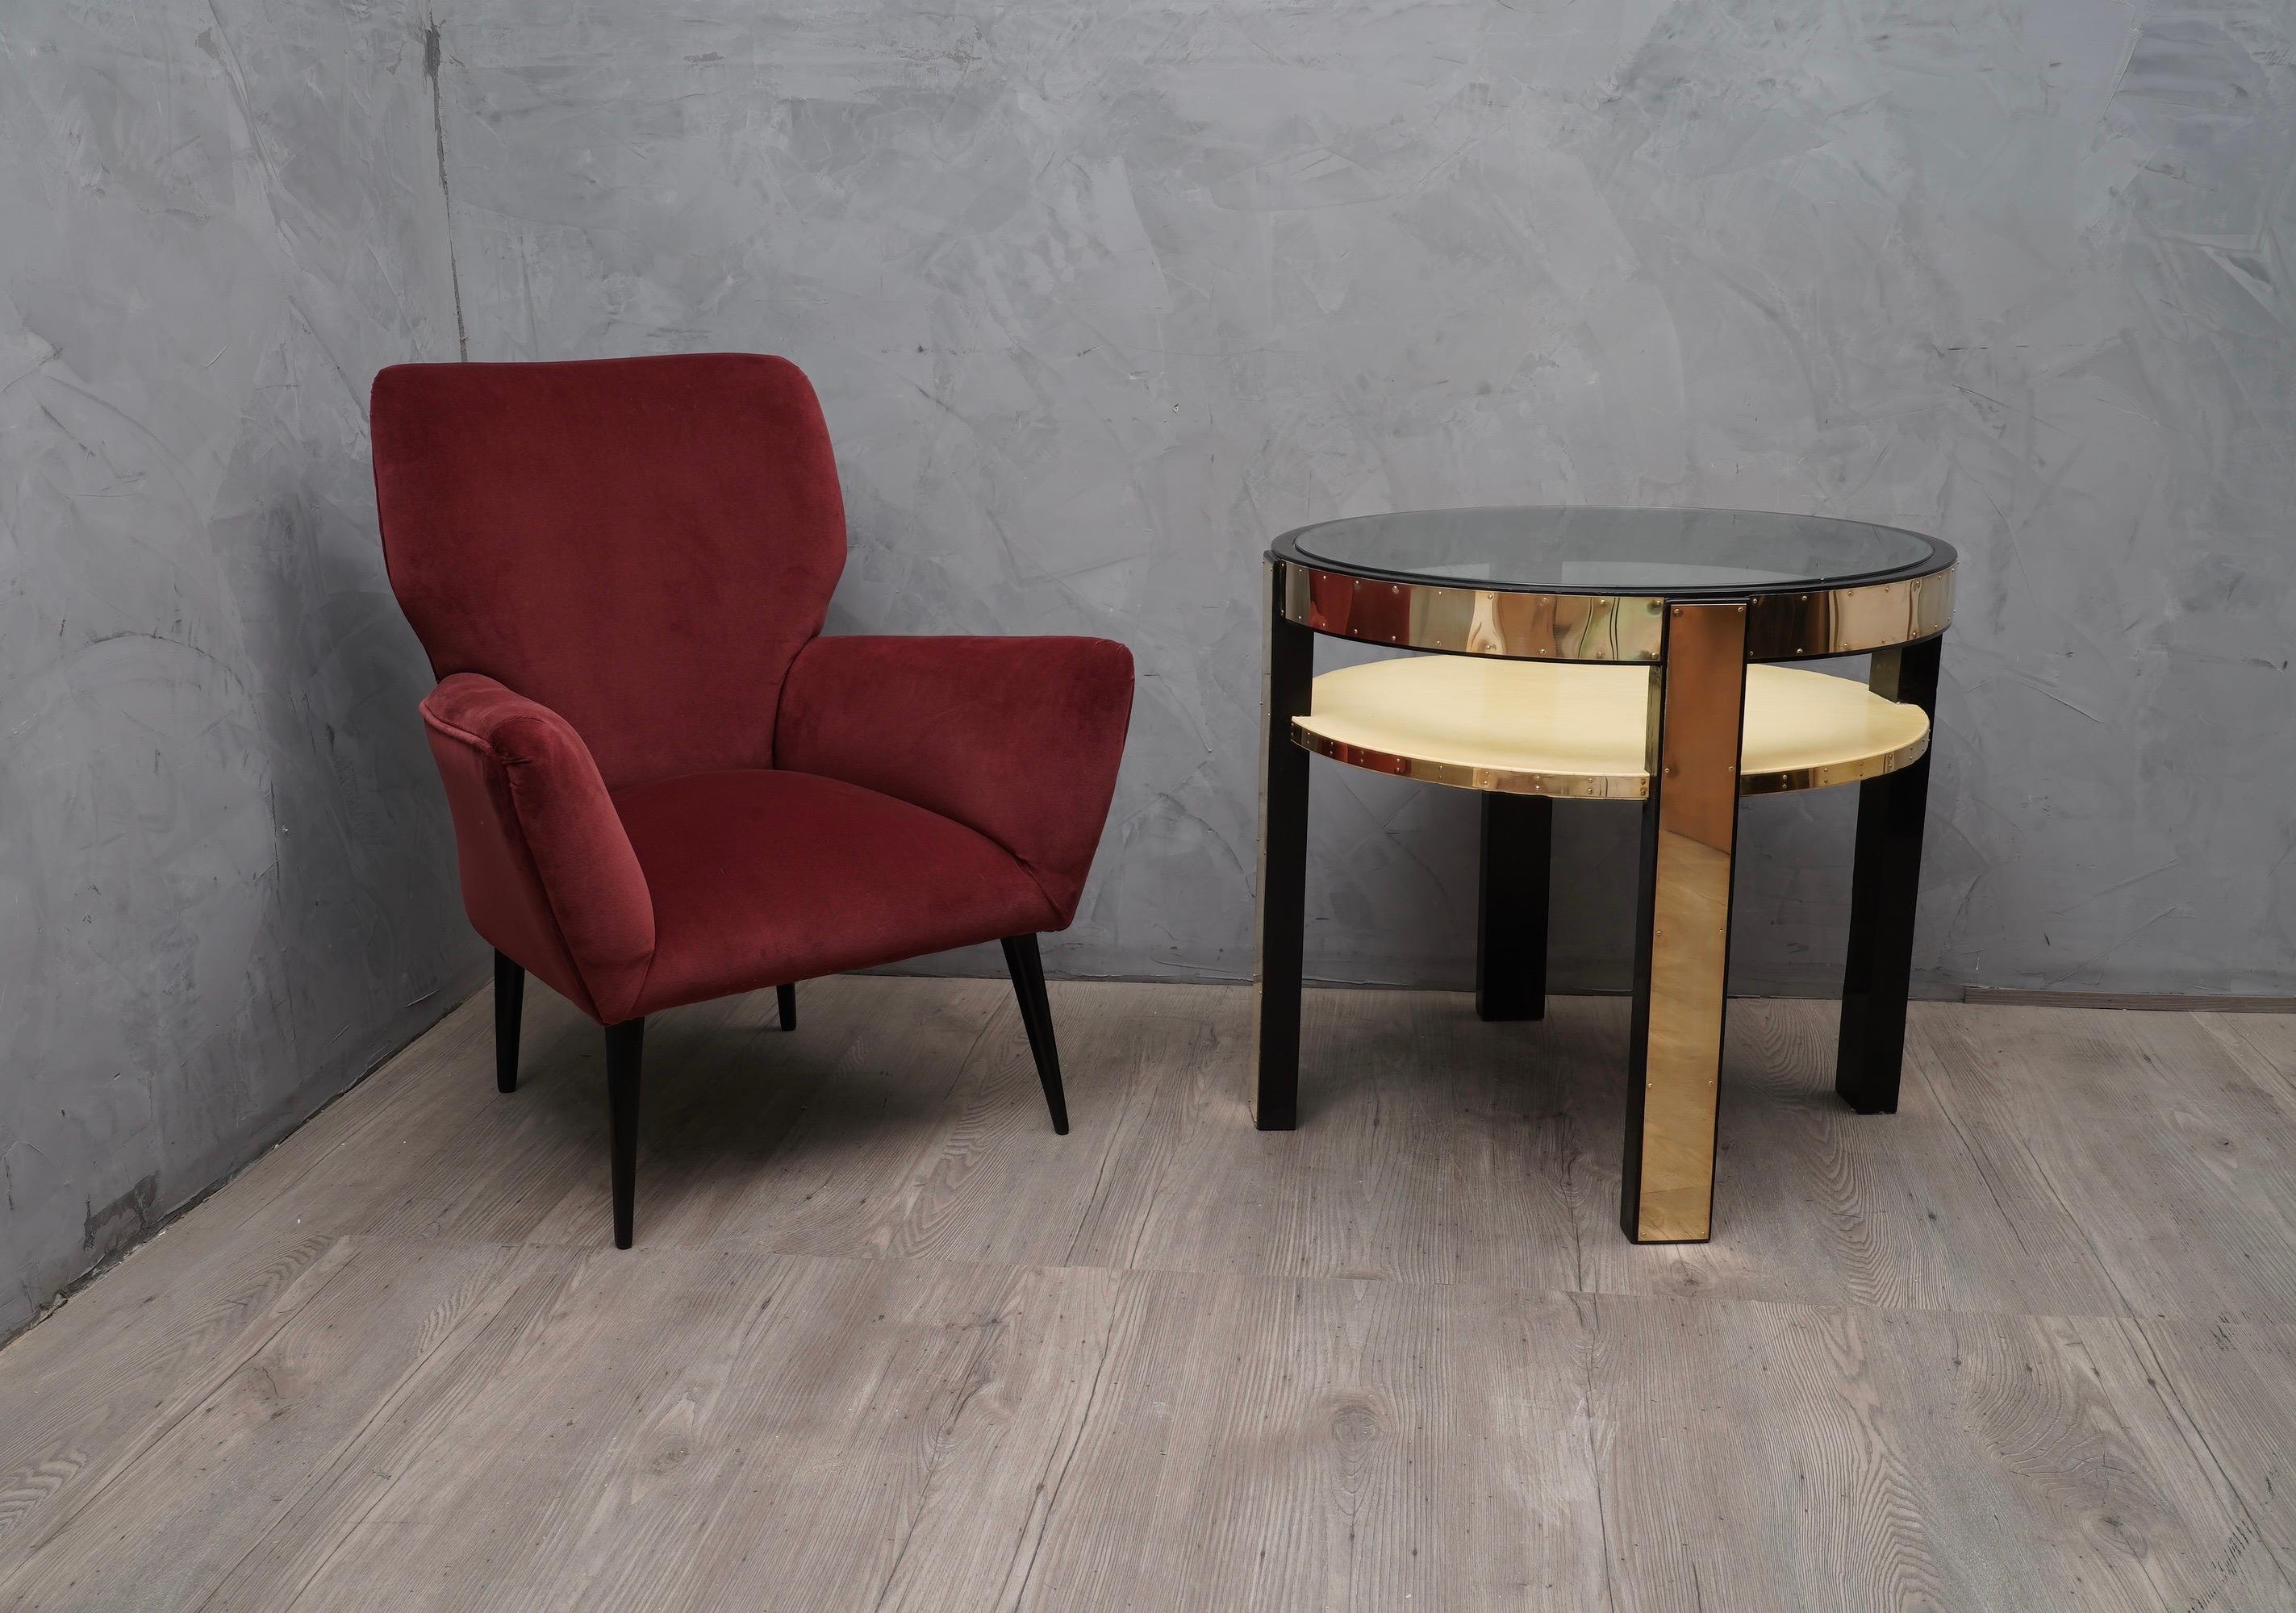 This side table has a very luxurious appearance, due the use of not common materials, that blend nicely together.

The coffee table is round in shape and of good size, it is formed by a lacquered wood structure with black shellac; as you can see